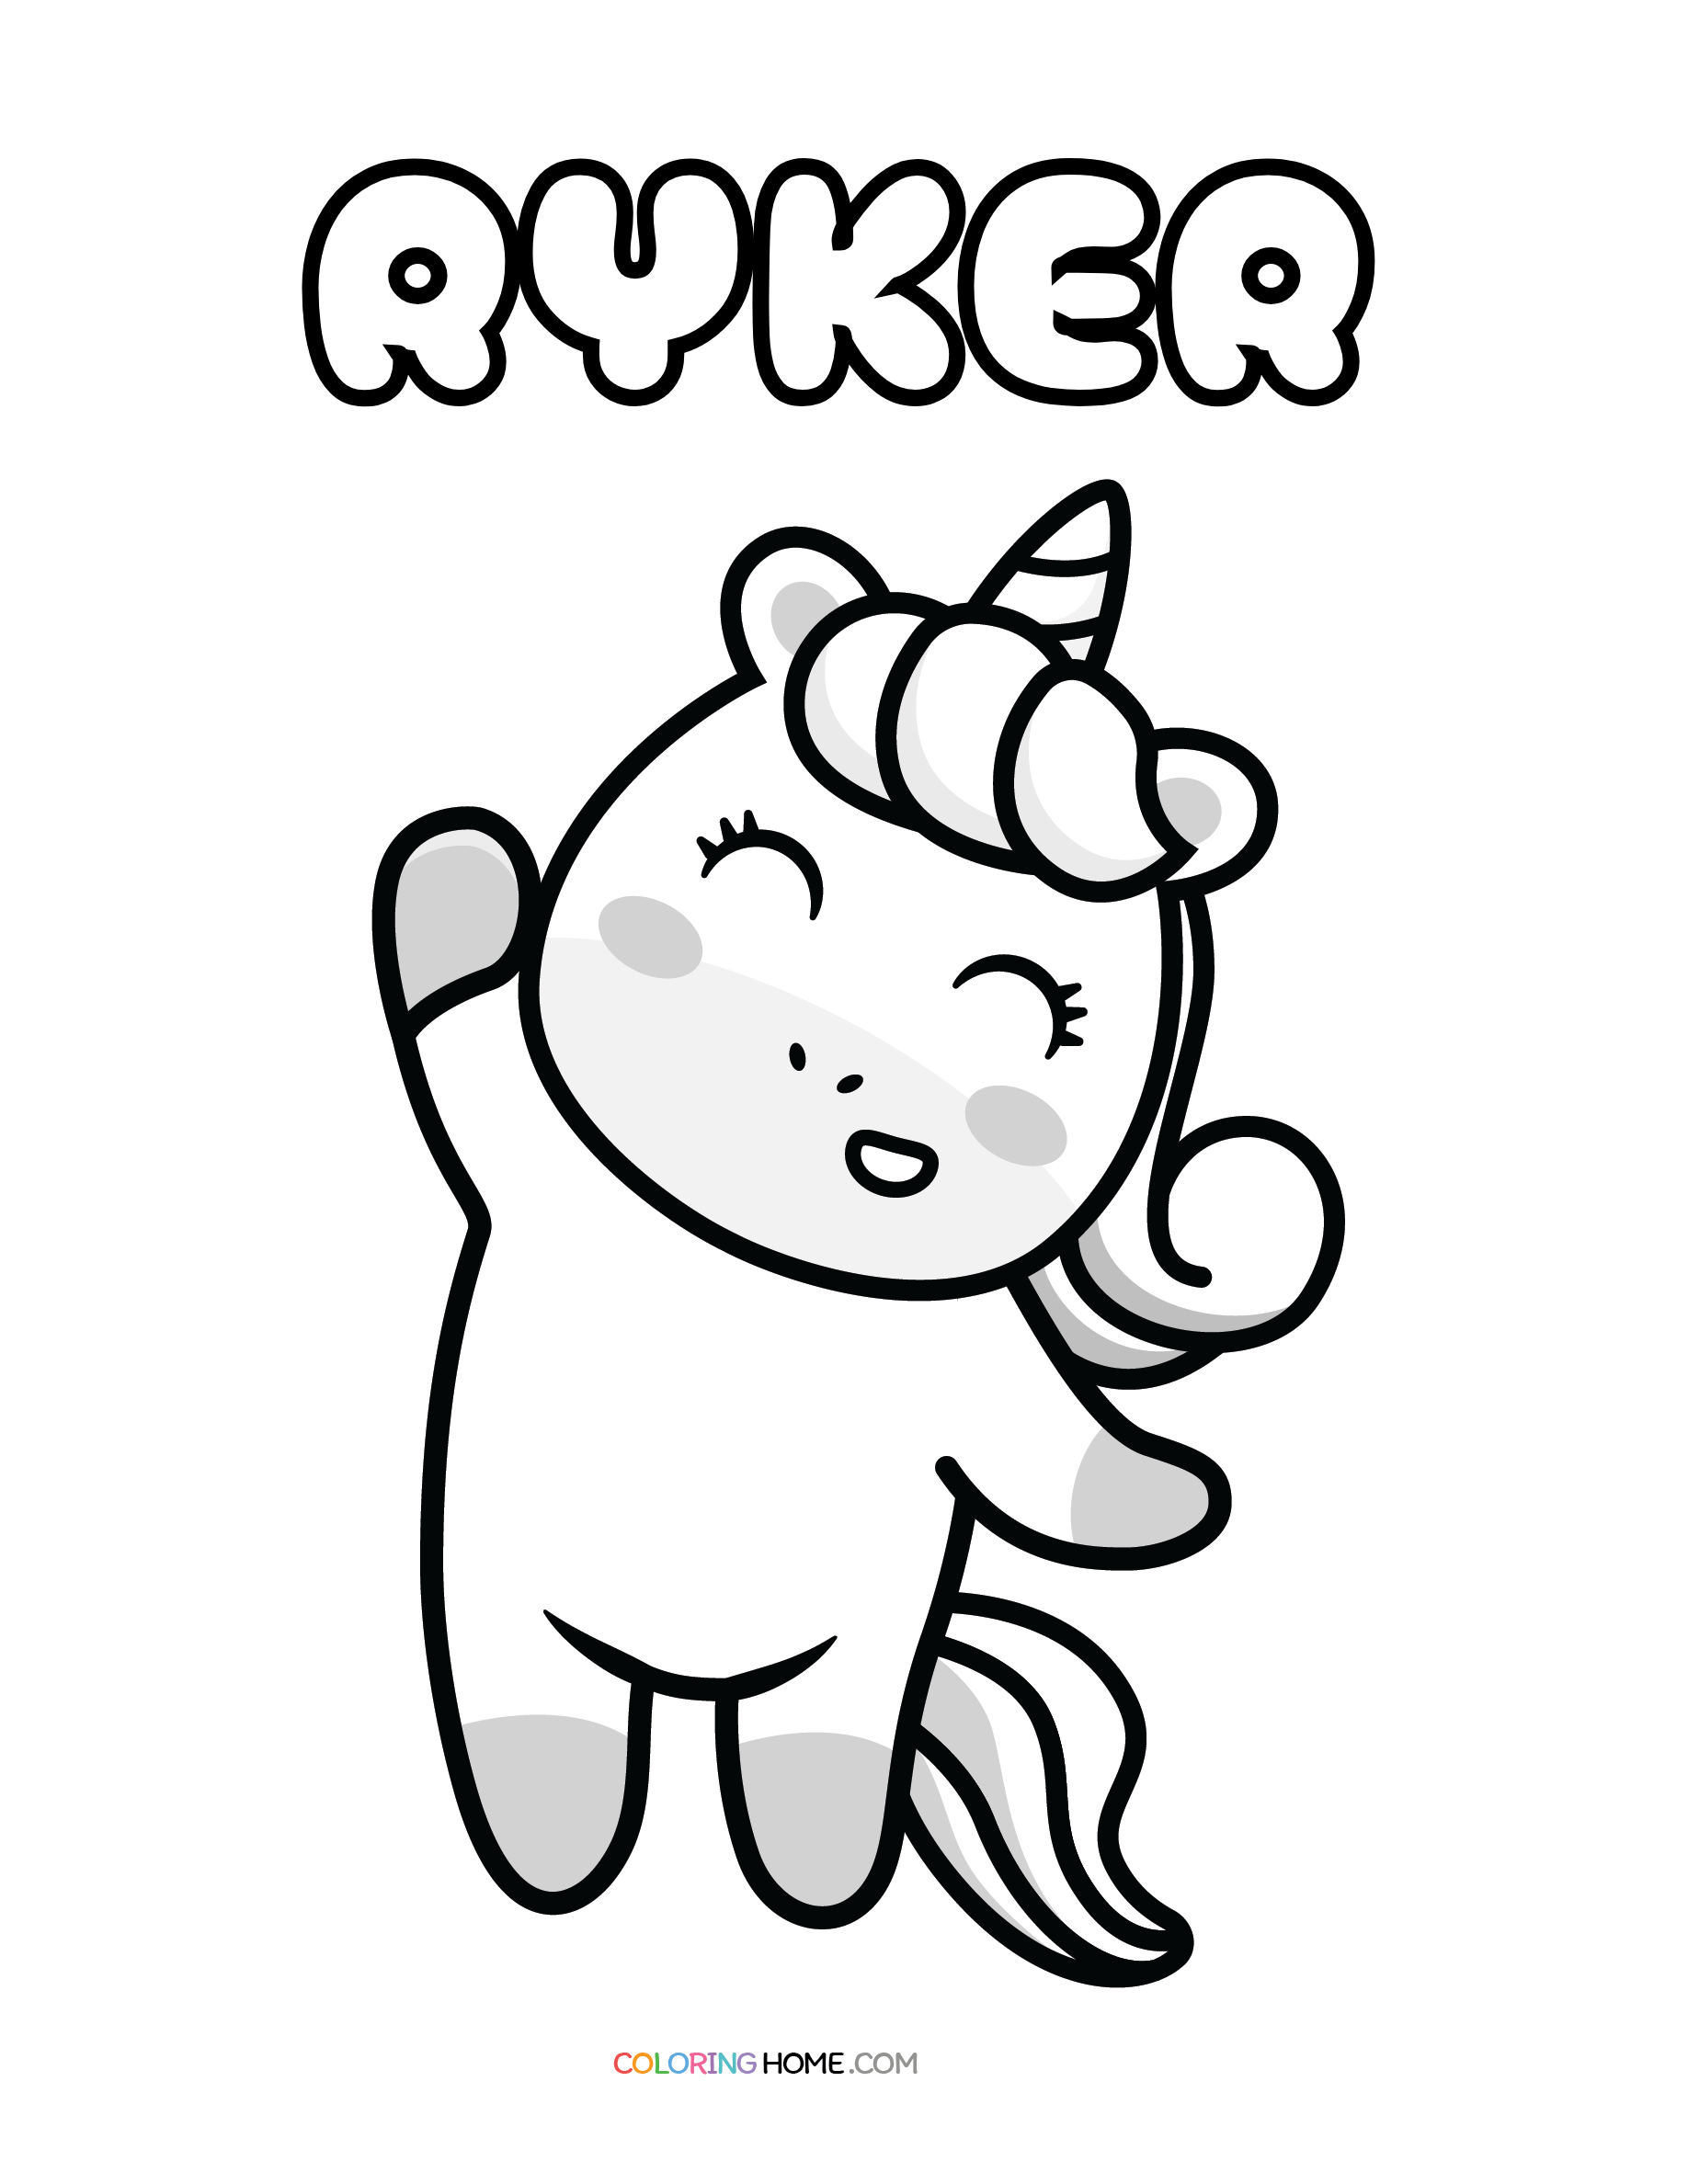 Ryker unicorn coloring page